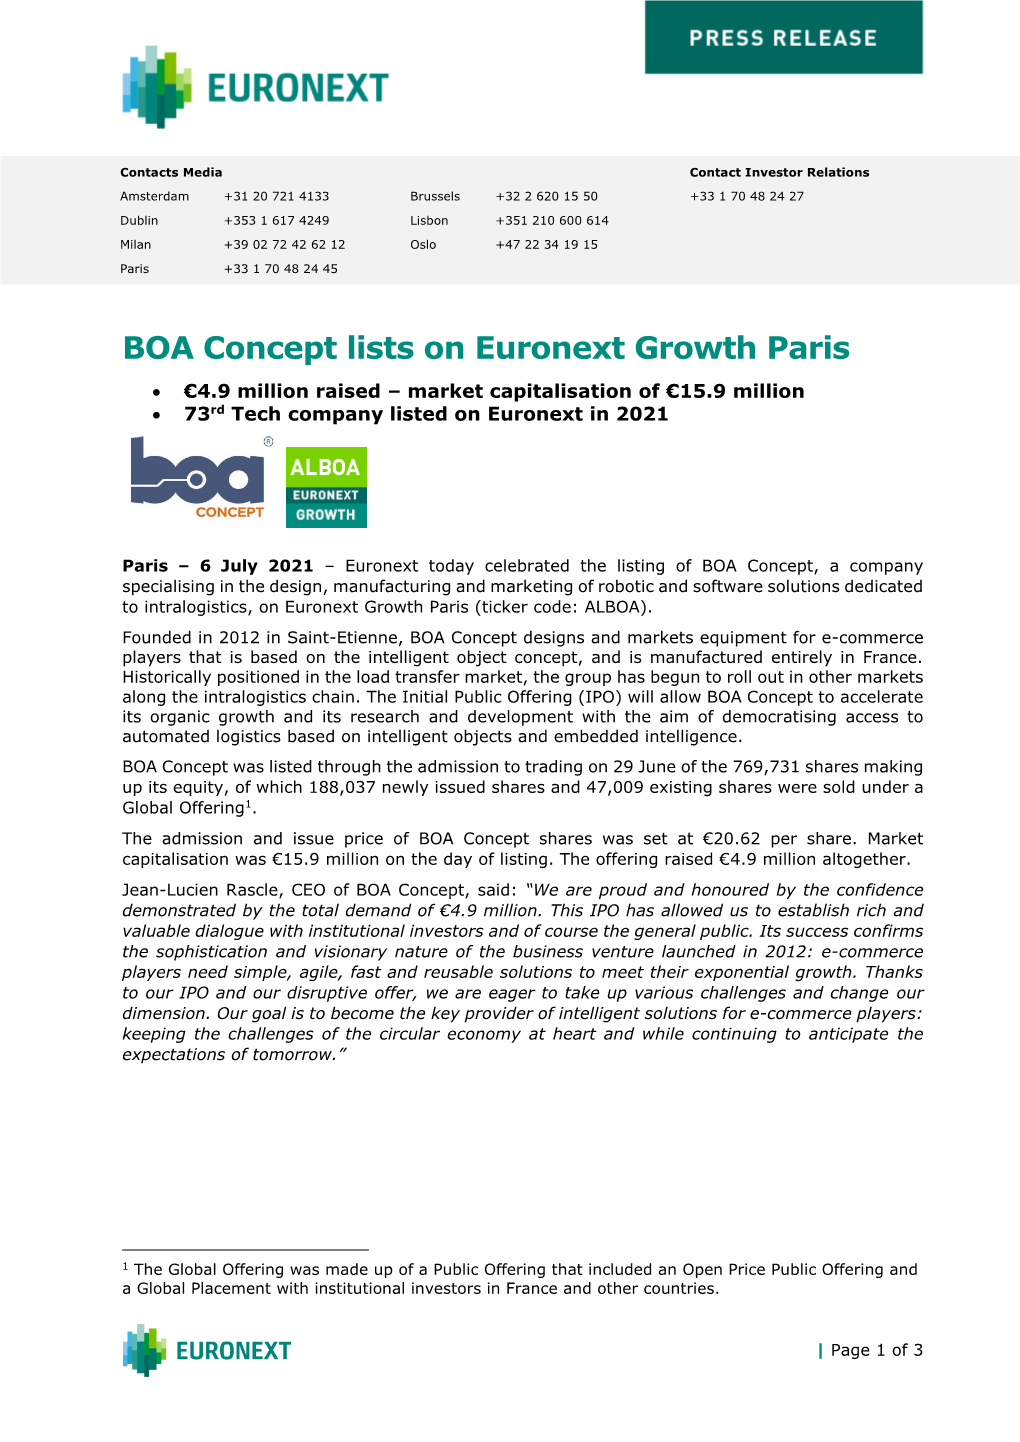 BOA Concept Lists on Euronext Growth Paris • €4.9 Million Raised – Market Capitalisation of €15.9 Million • 73Rd Tech Company Listed on Euronext in 2021 •